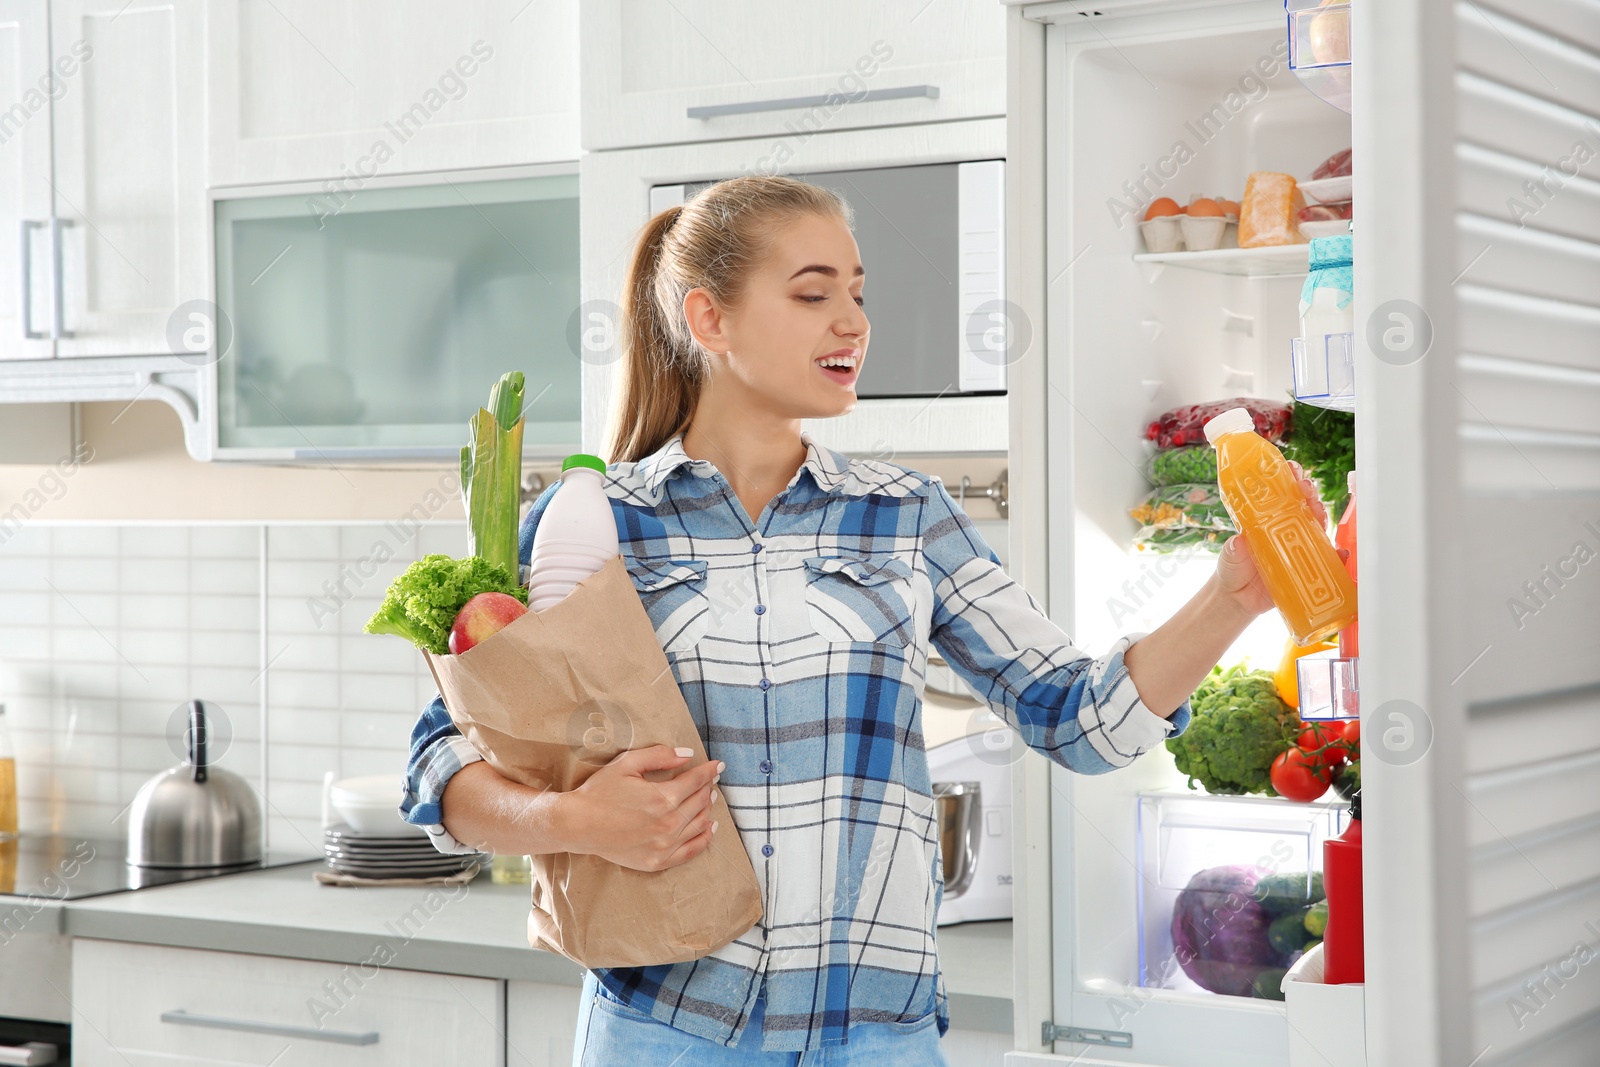 Photo of Woman putting products into refrigerator in kitchen